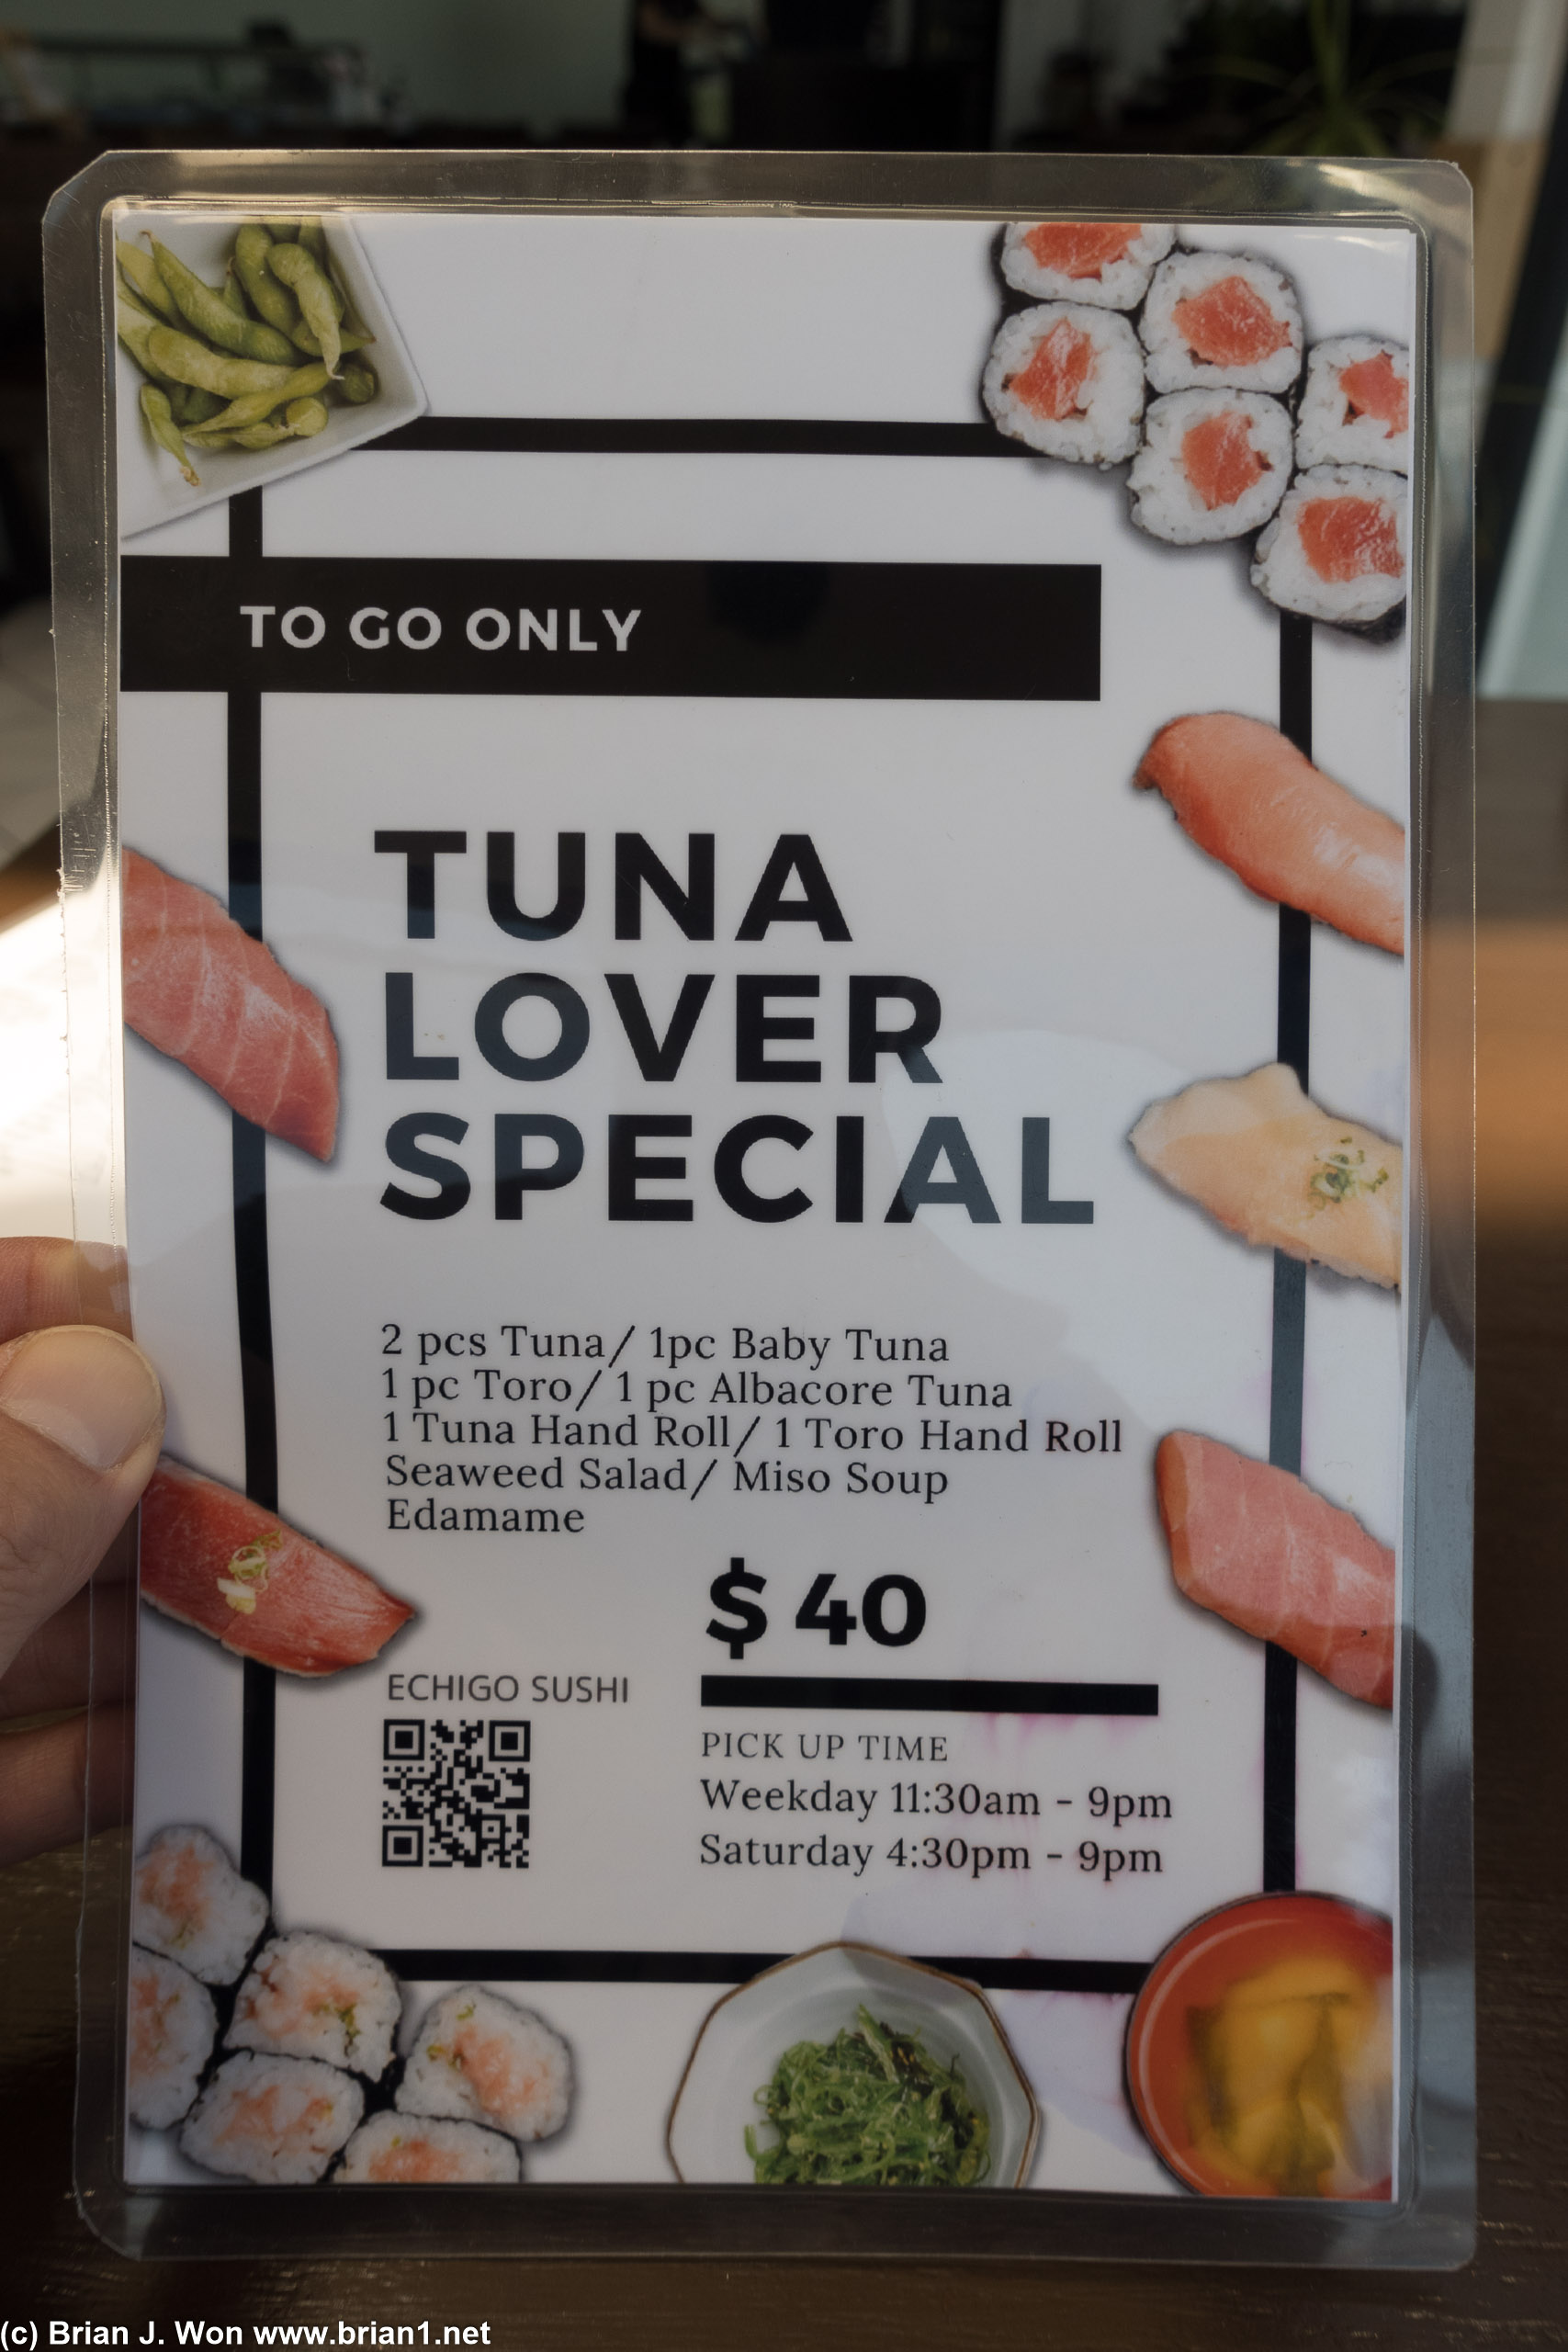 Tuna special is to-go only?